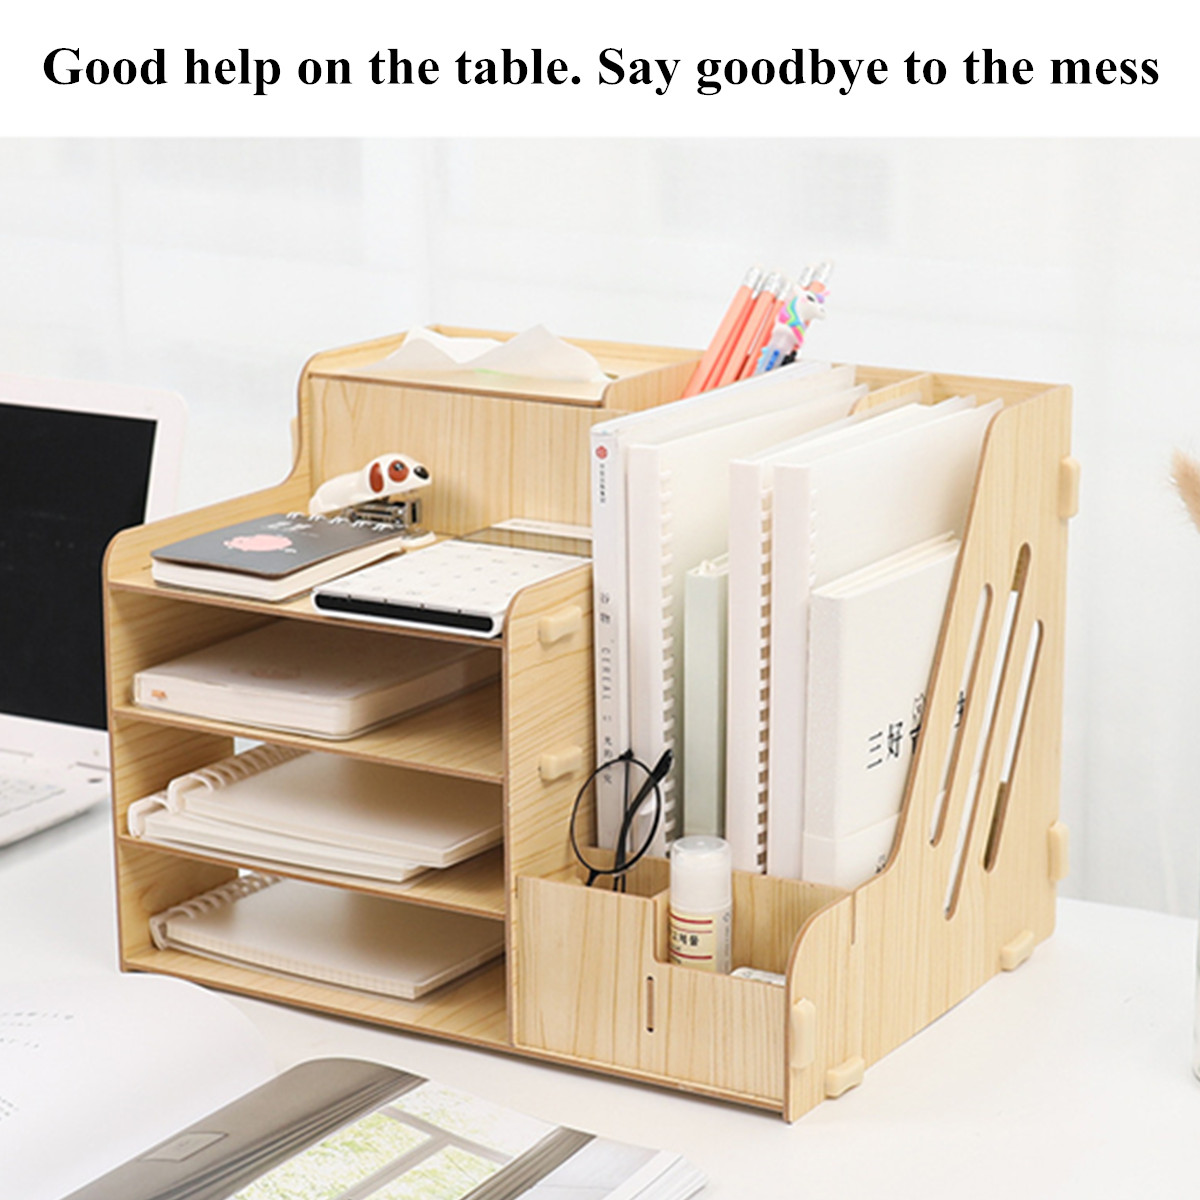 Stationery-Container-Desktop-Drawer-Organizer-Desktop-Storage-Box-Brush-Container-Office-Pencil-Hold-1603946-3